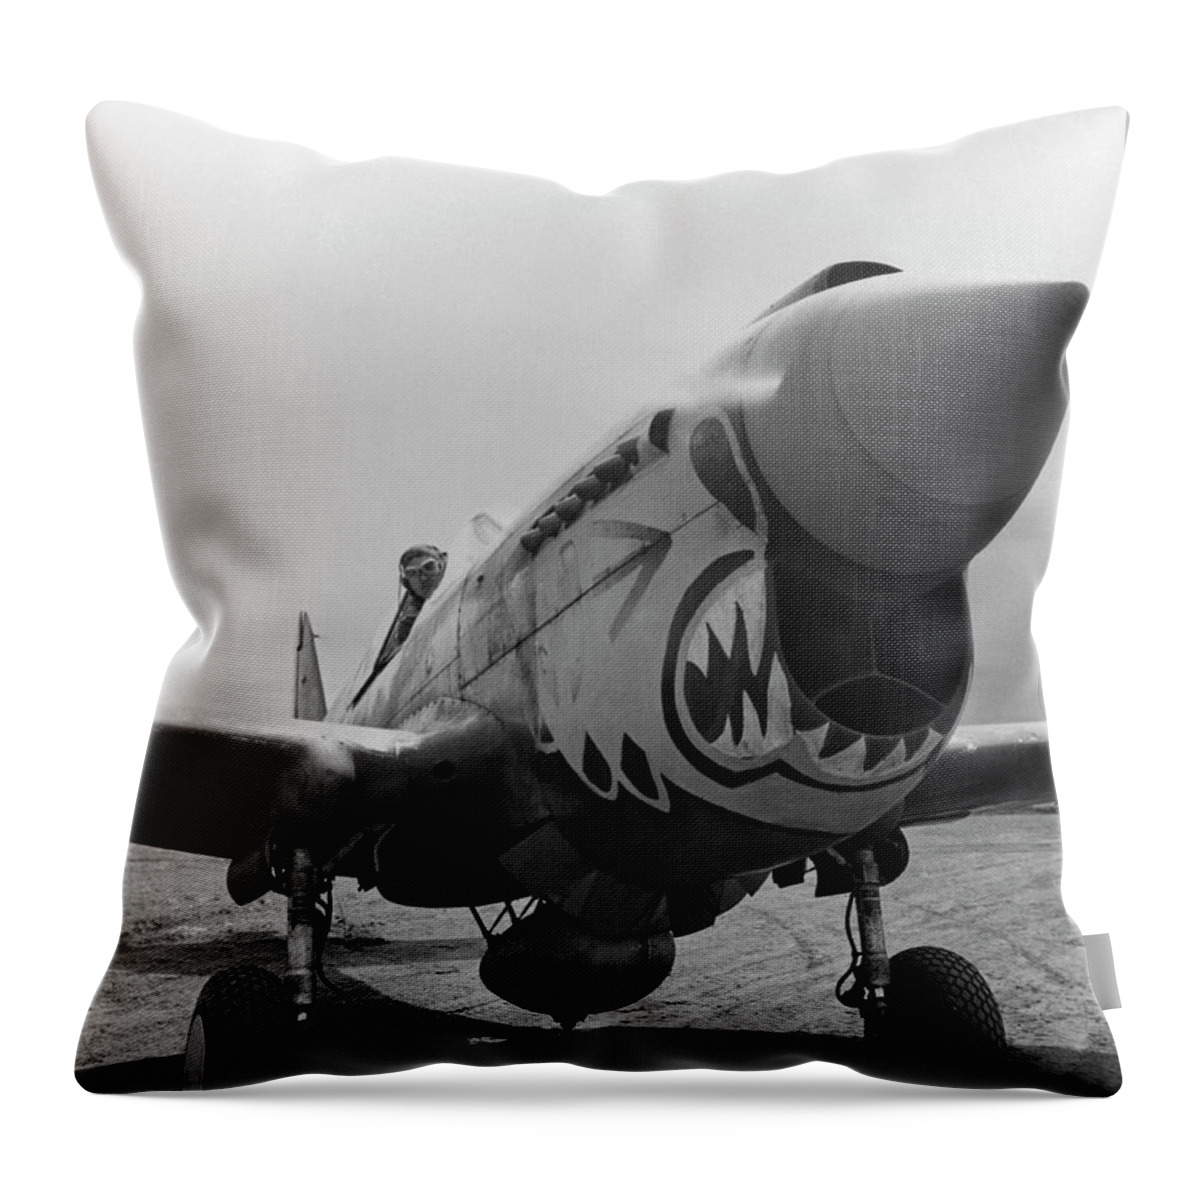 Ww2 Throw Pillow featuring the photograph P-40 Warhawk - Flying Tiger by War Is Hell Store